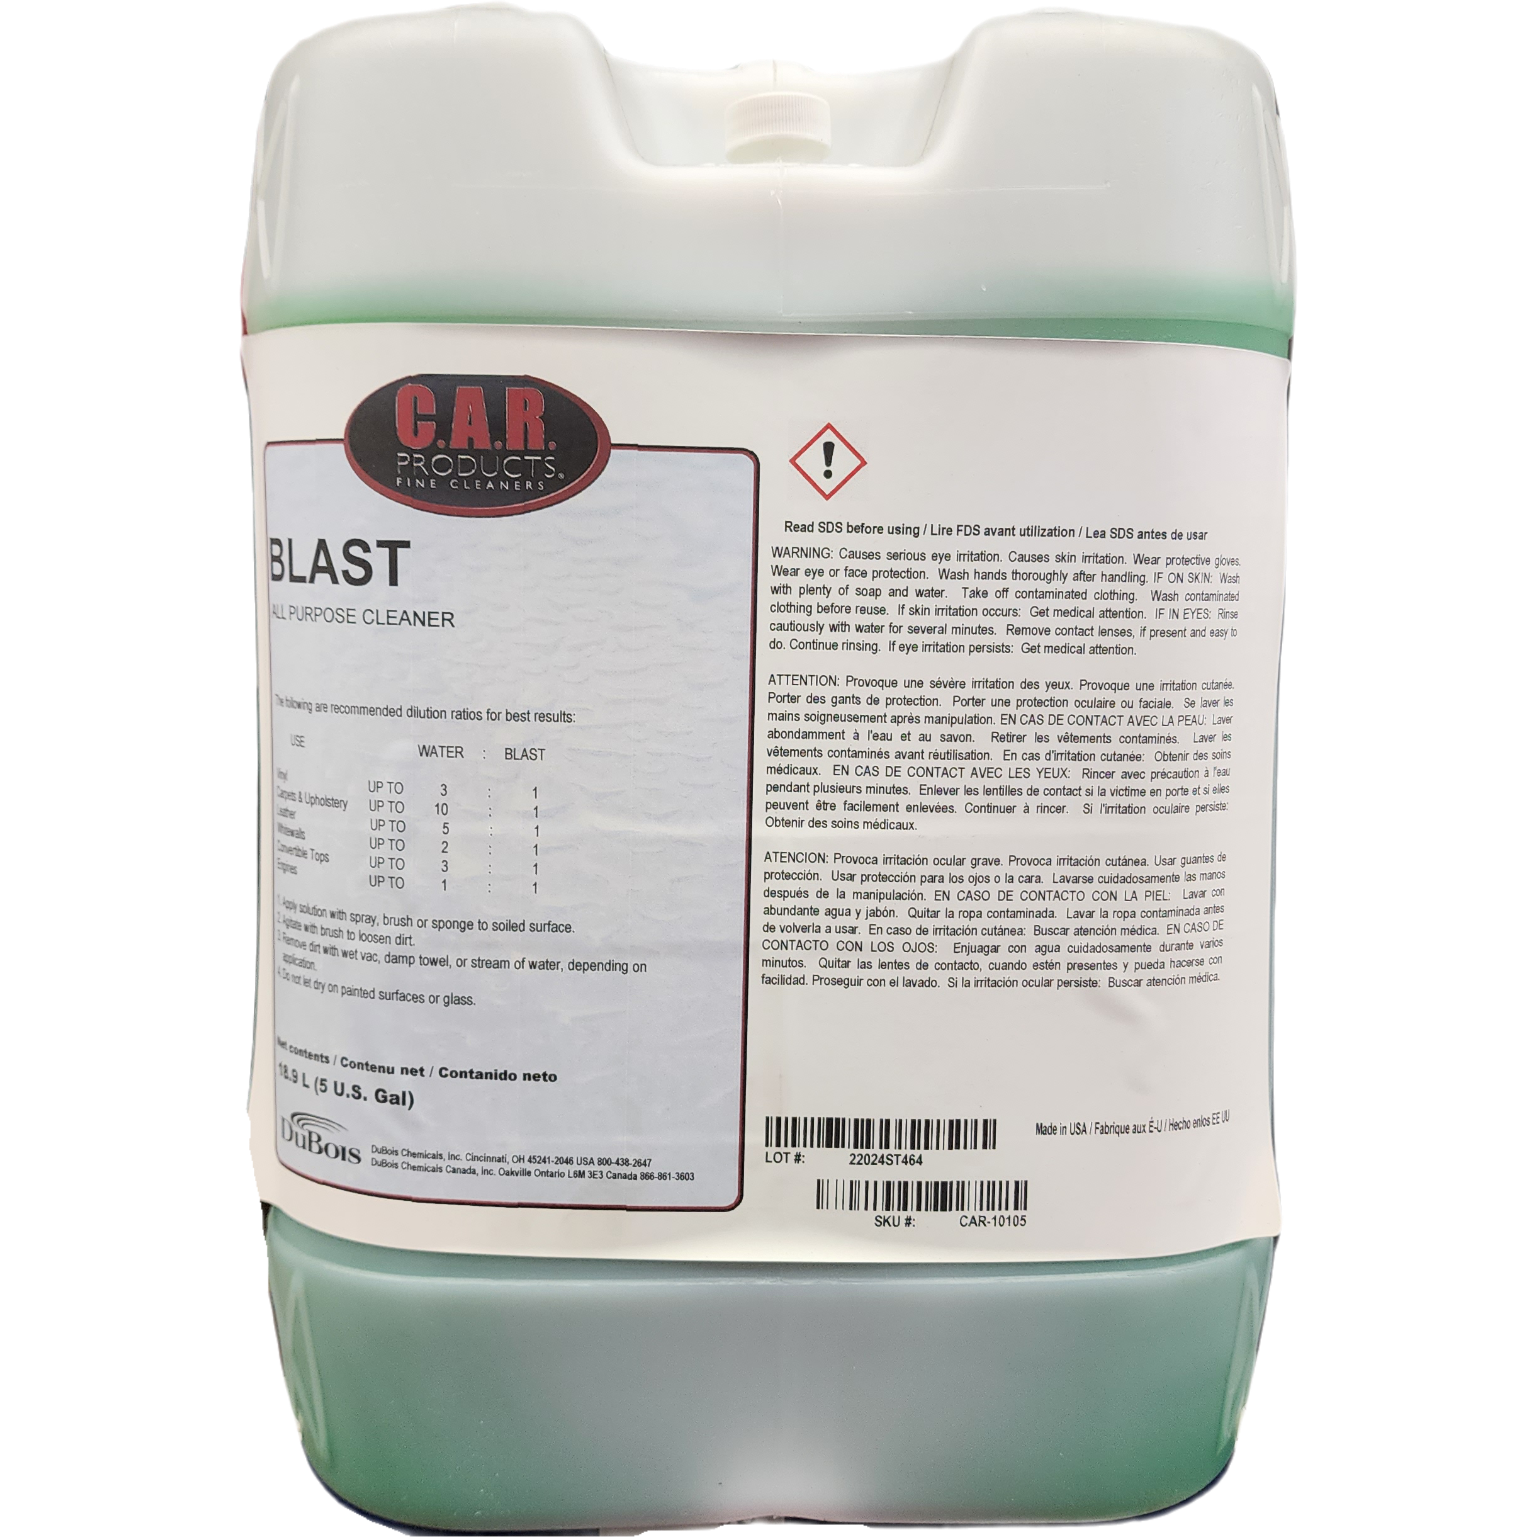 XCP CAR-10105 CAR Products Blast All Purpose Cleaner (5 gal)